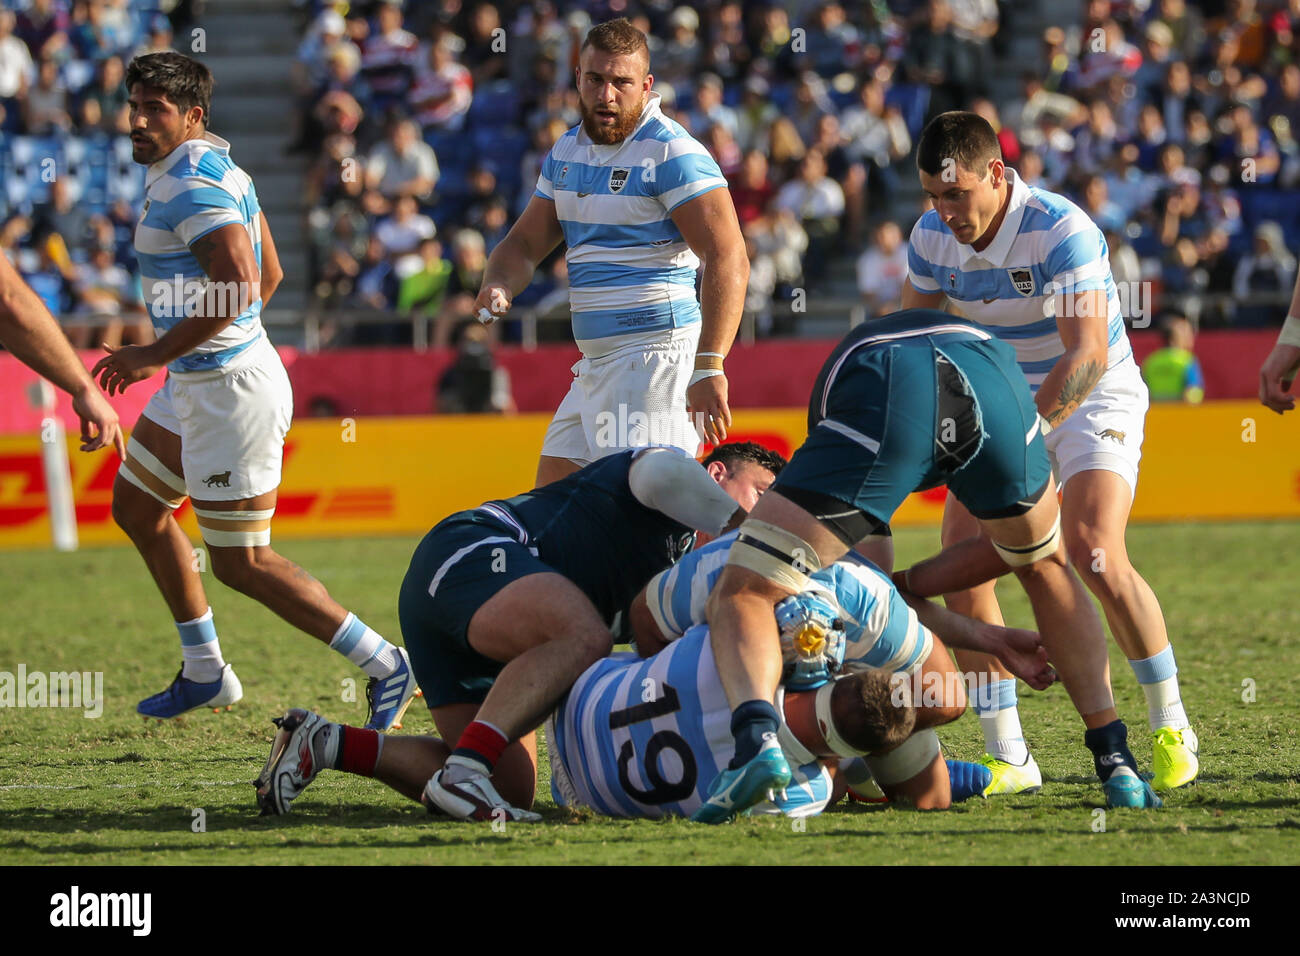 T'QUIO, TO - 09.10.2019: RUGBY WORLD CUP 2019 ARGENTINA X EUA - Greg  Peterson in ruck-off shorts during Argentina's laste ame against the United  States for the Rugby World Cup 2019 at